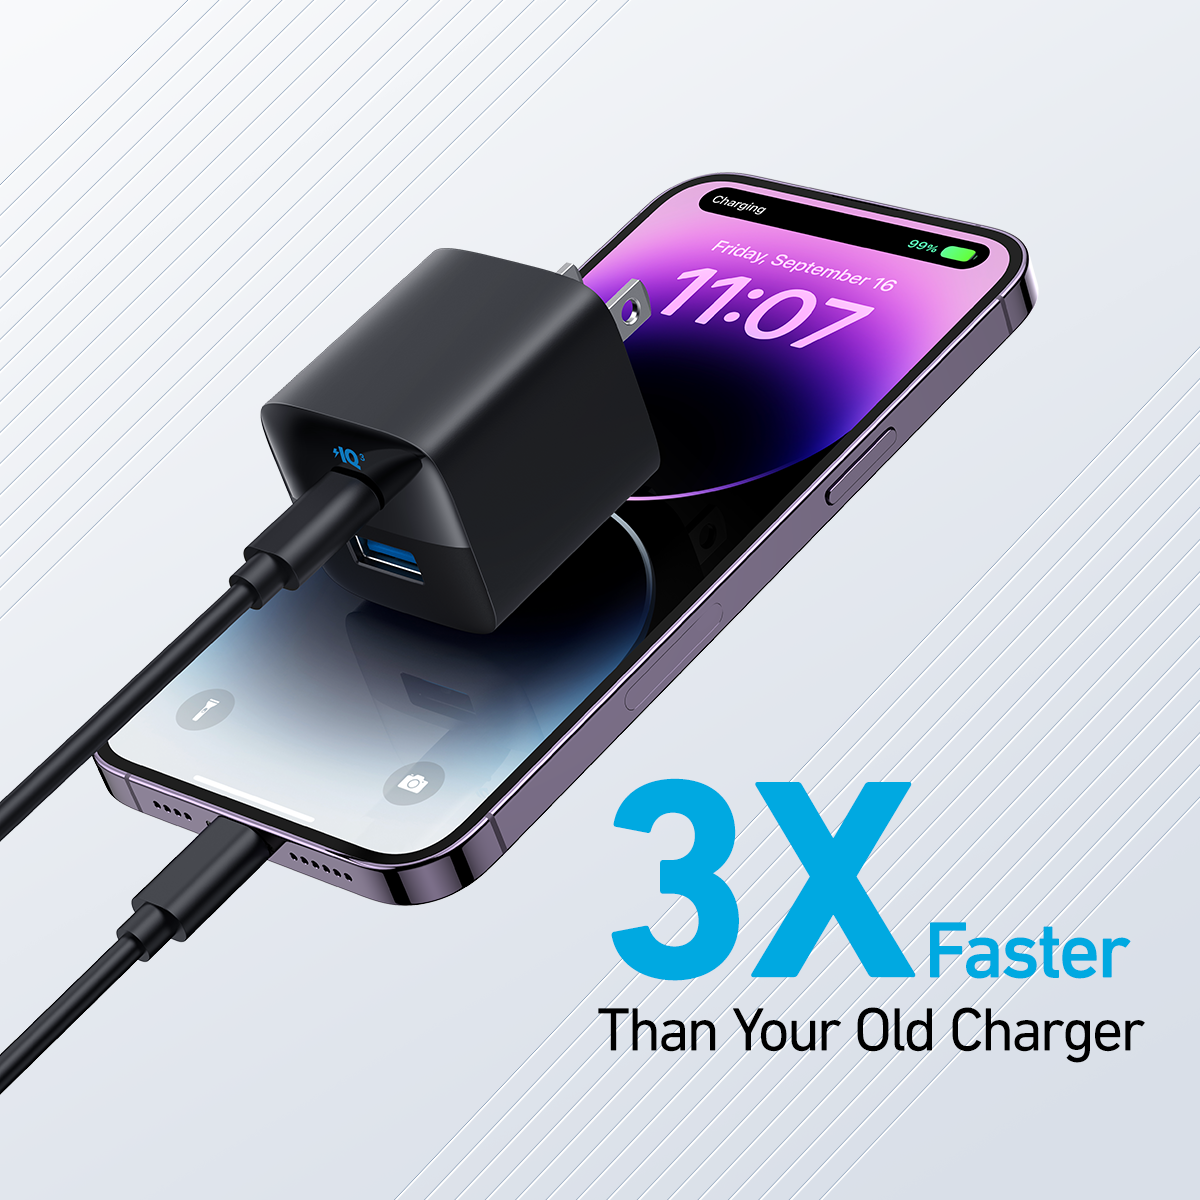 Anker releases new 323 Charger